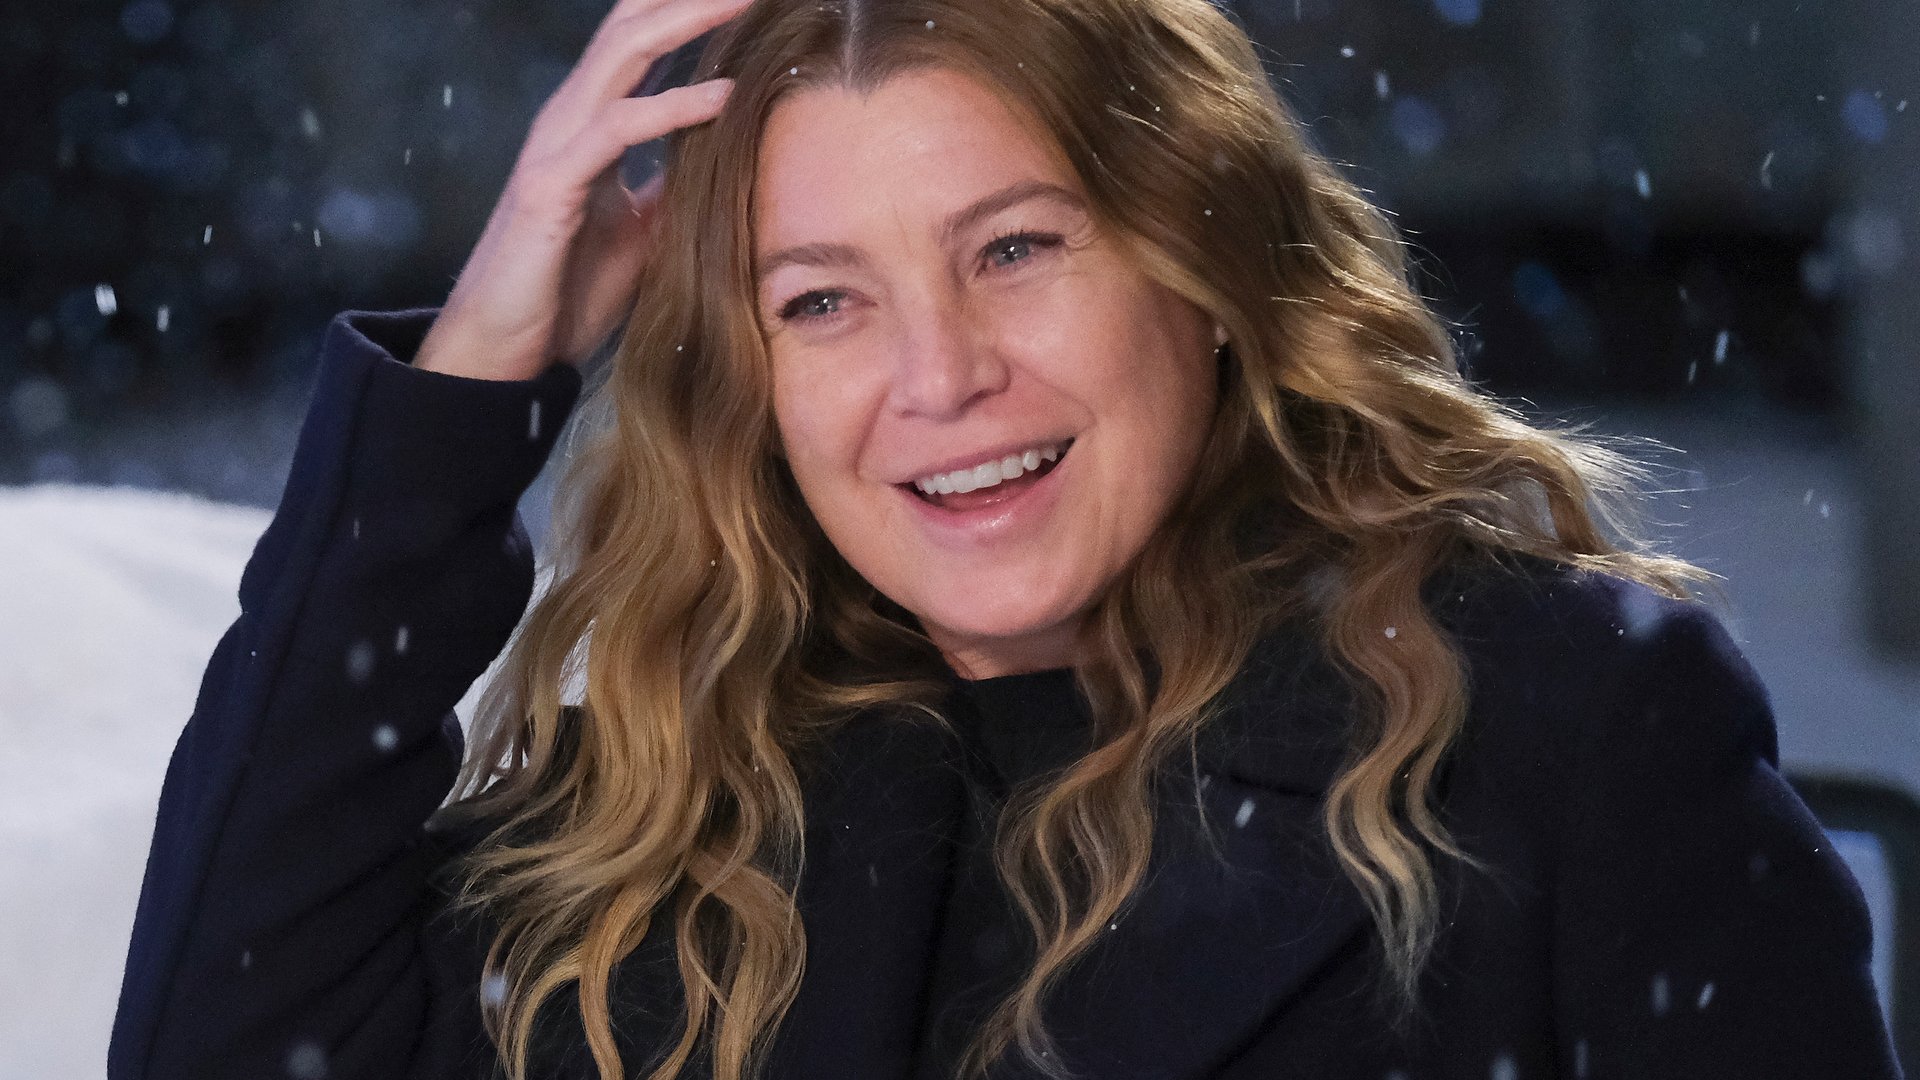 Ellen Pompeo as Meredith Grey shakes snow out of her hair while smiling in ‘Grey’s Anatomy’ Season 17 Episode 9, ‘In My Life’